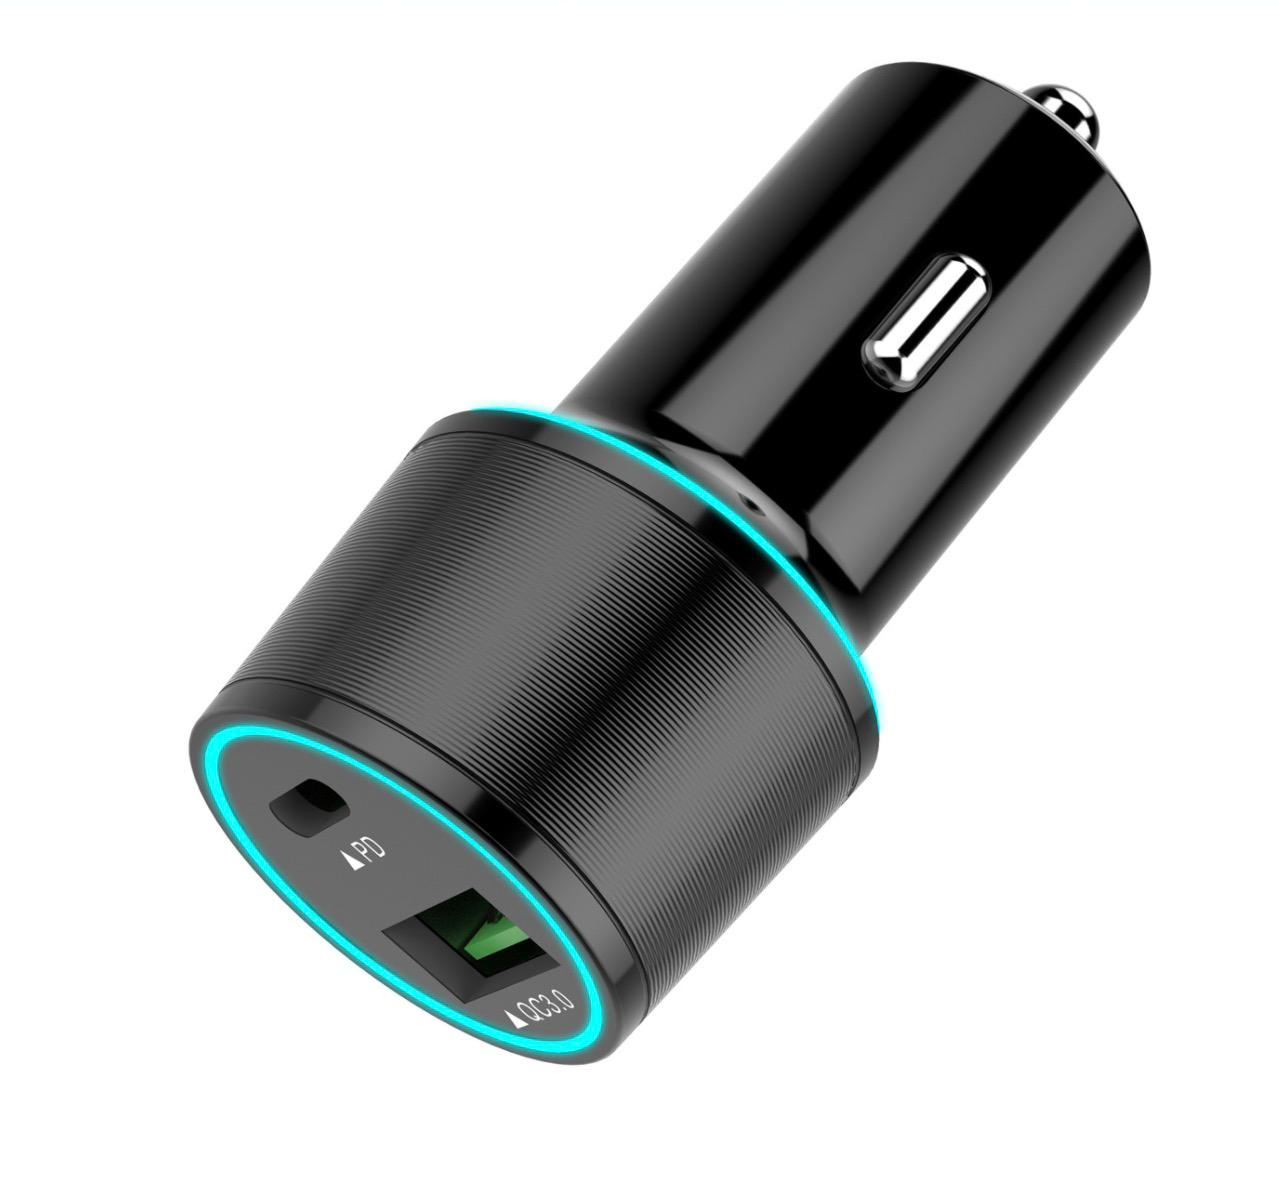 USB C Car Charger UrbanX 20W Car and Truck Charger For Motorola Moto E (2nd gen) with Power Delivery 3.0 Cigarette Lighter USB Charger - Black, Comes with USB C to USB C PD Cable 3.3FT 1M - image 2 of 3